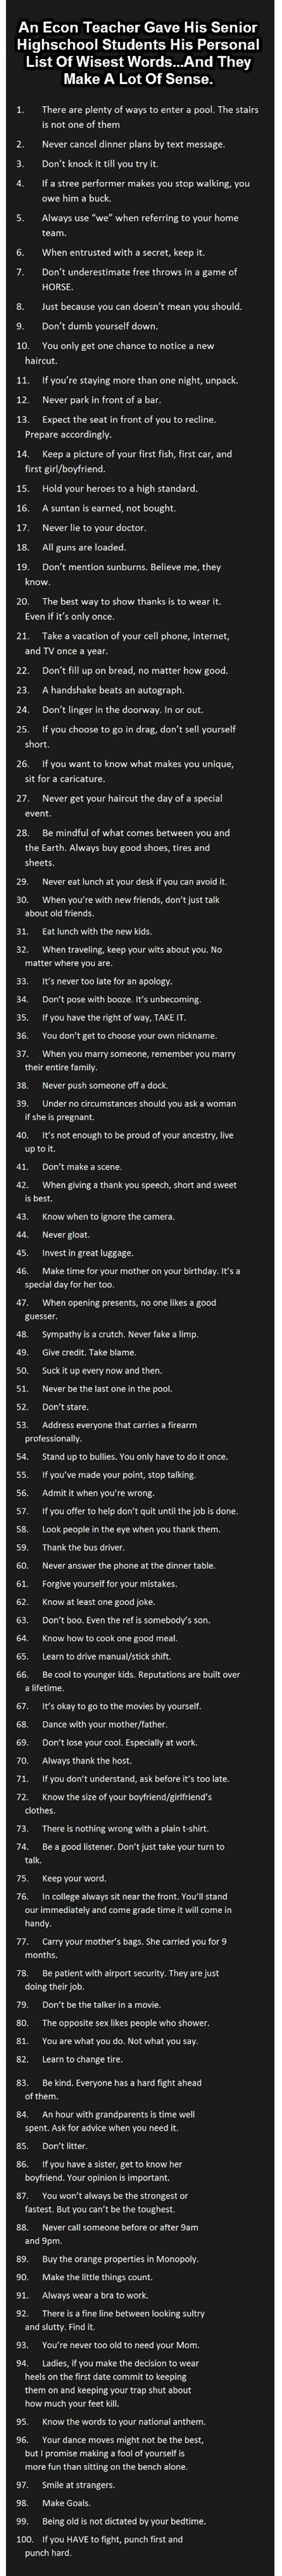 100 Rules Of Life For Everyone